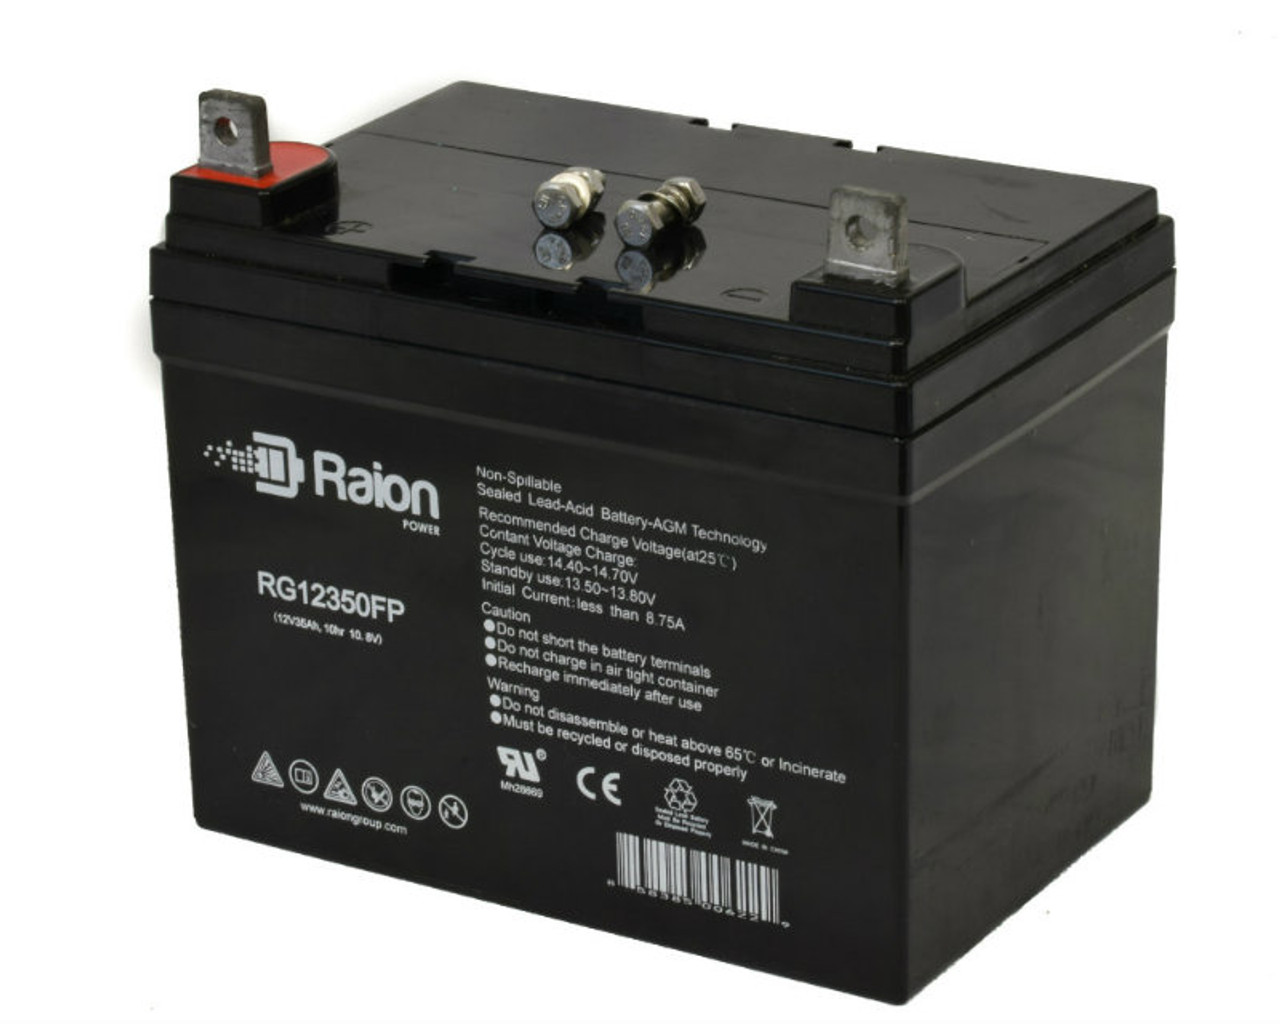 Raion Power Replacement 12V 35Ah RG12350FP Mobility Scooter Battery for Orthofab/Lifestyles 755FS